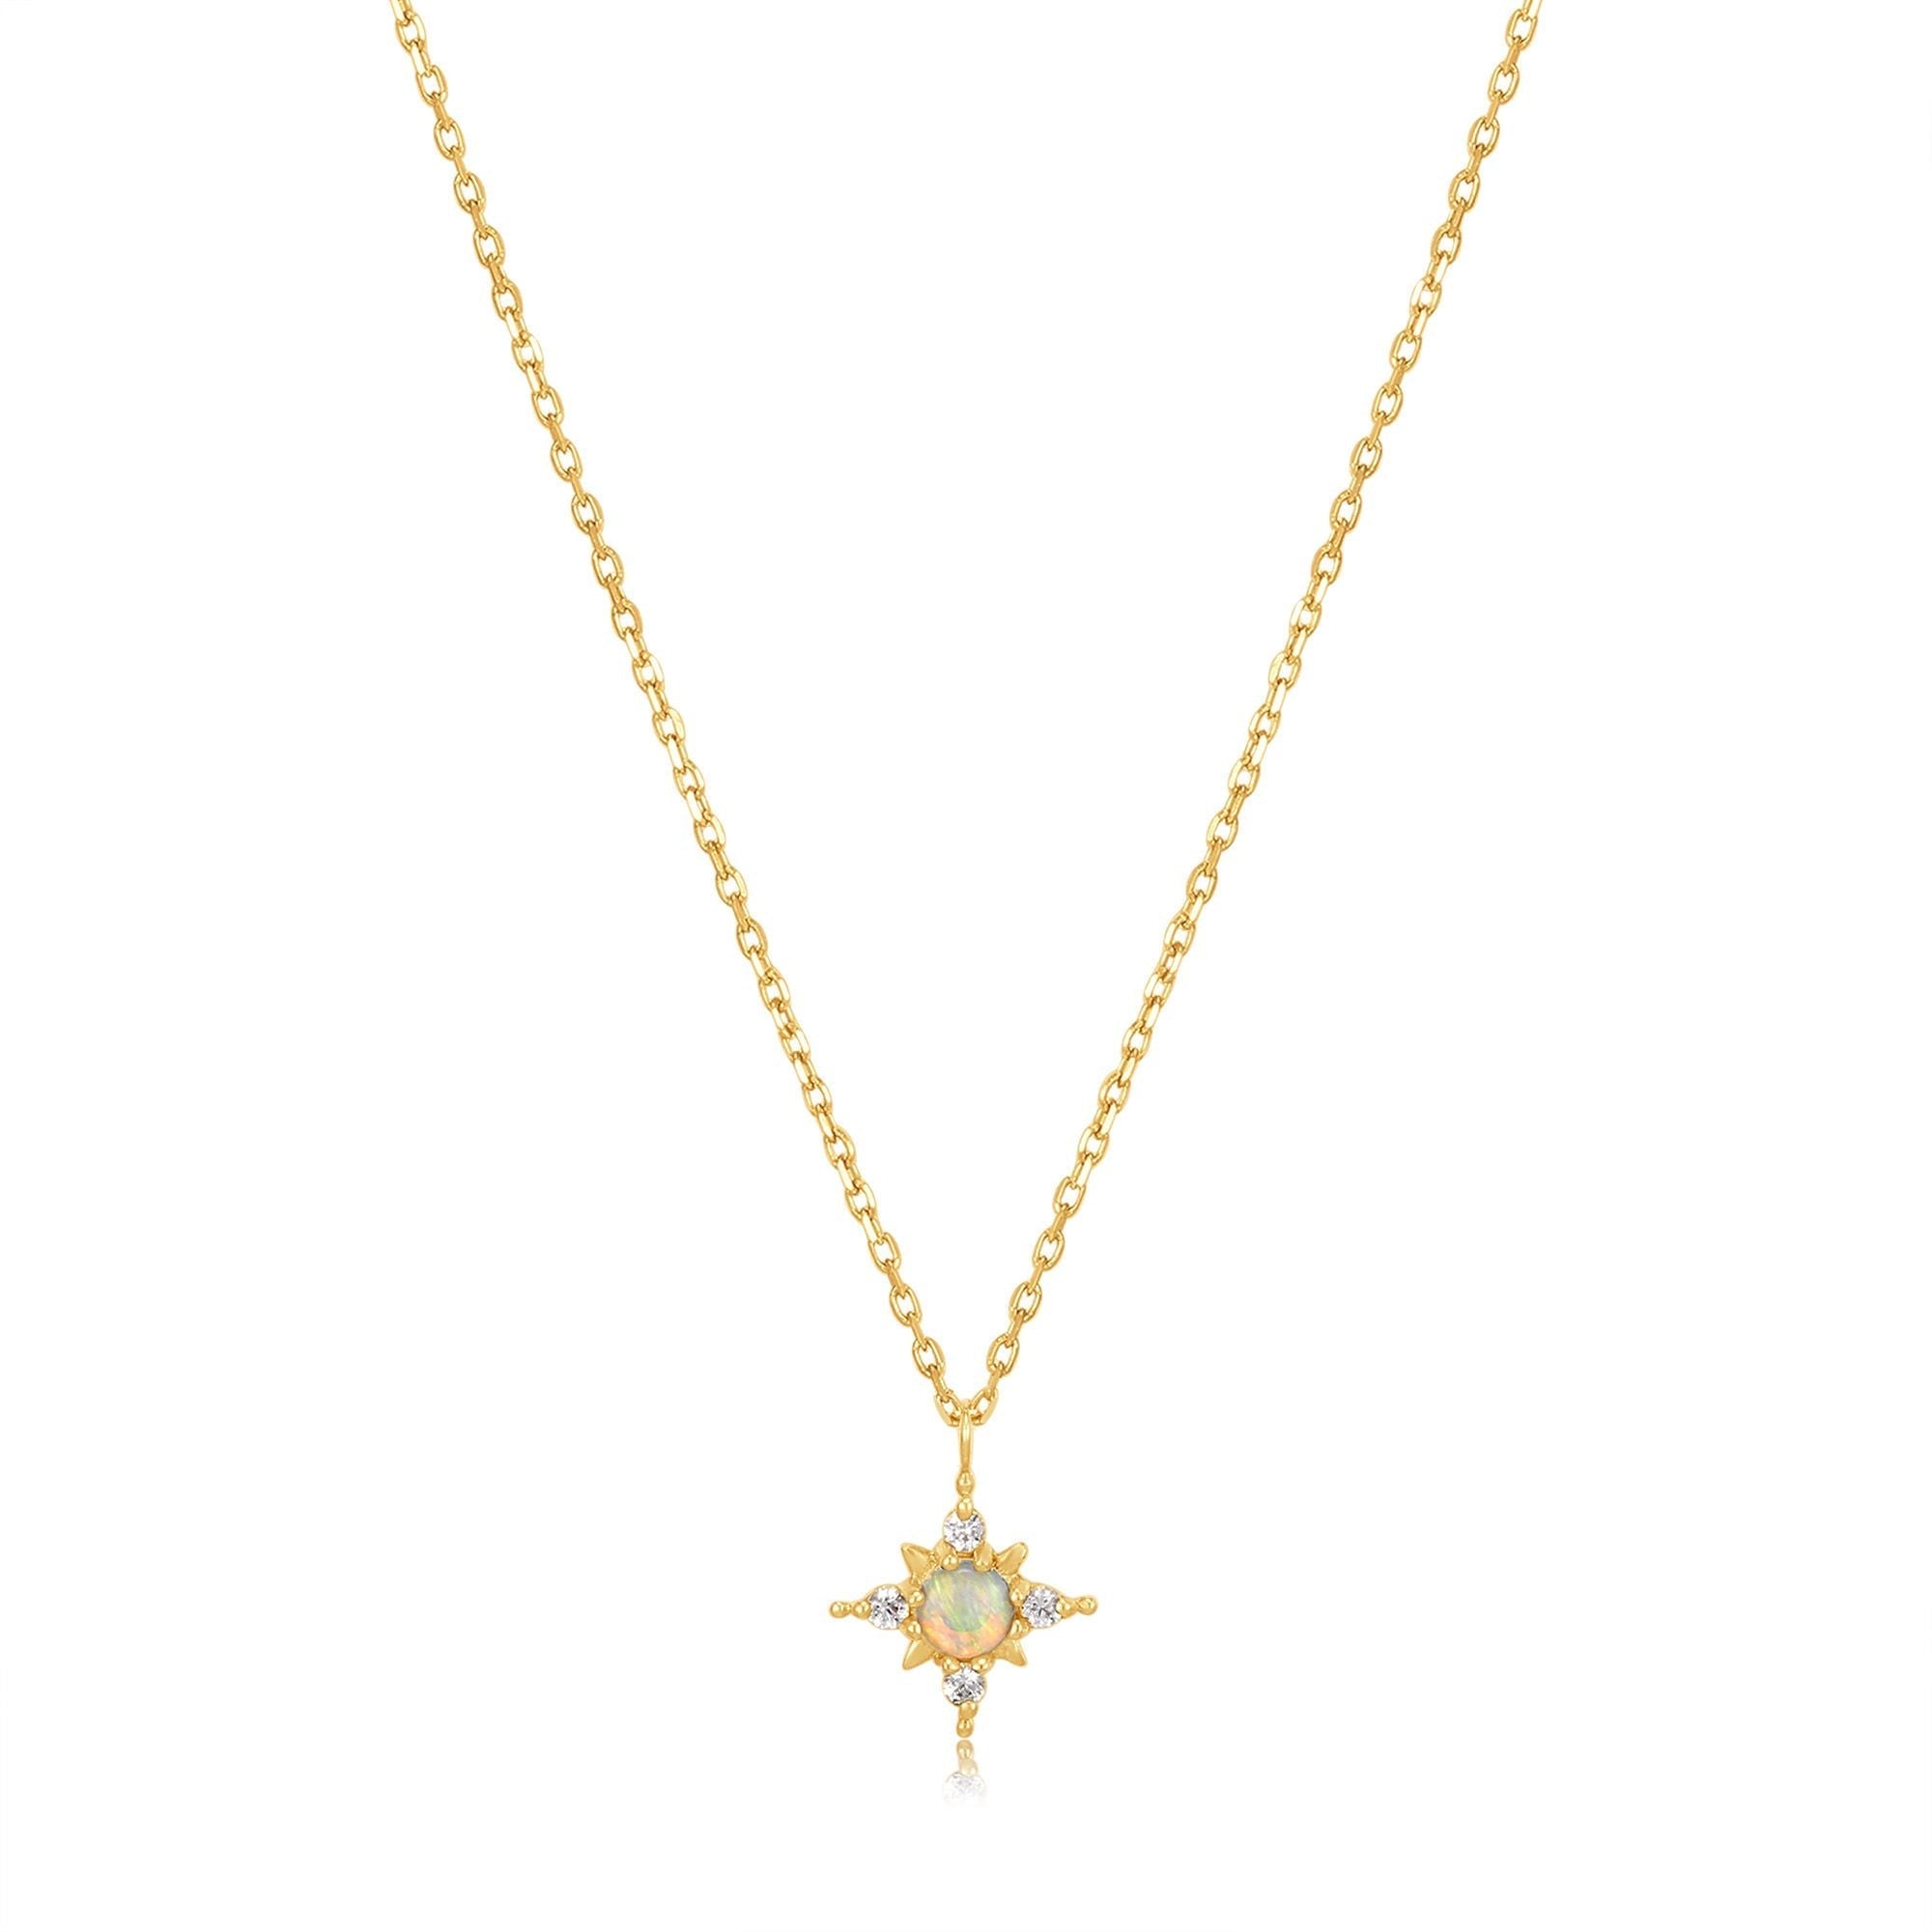 Ania Haie 14ct Gold Opal and White Sapphire Star Necklace